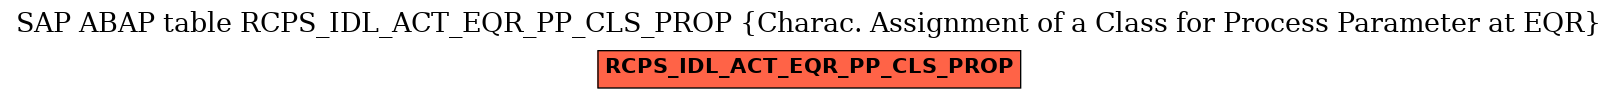 E-R Diagram for table RCPS_IDL_ACT_EQR_PP_CLS_PROP (Charac. Assignment of a Class for Process Parameter at EQR)